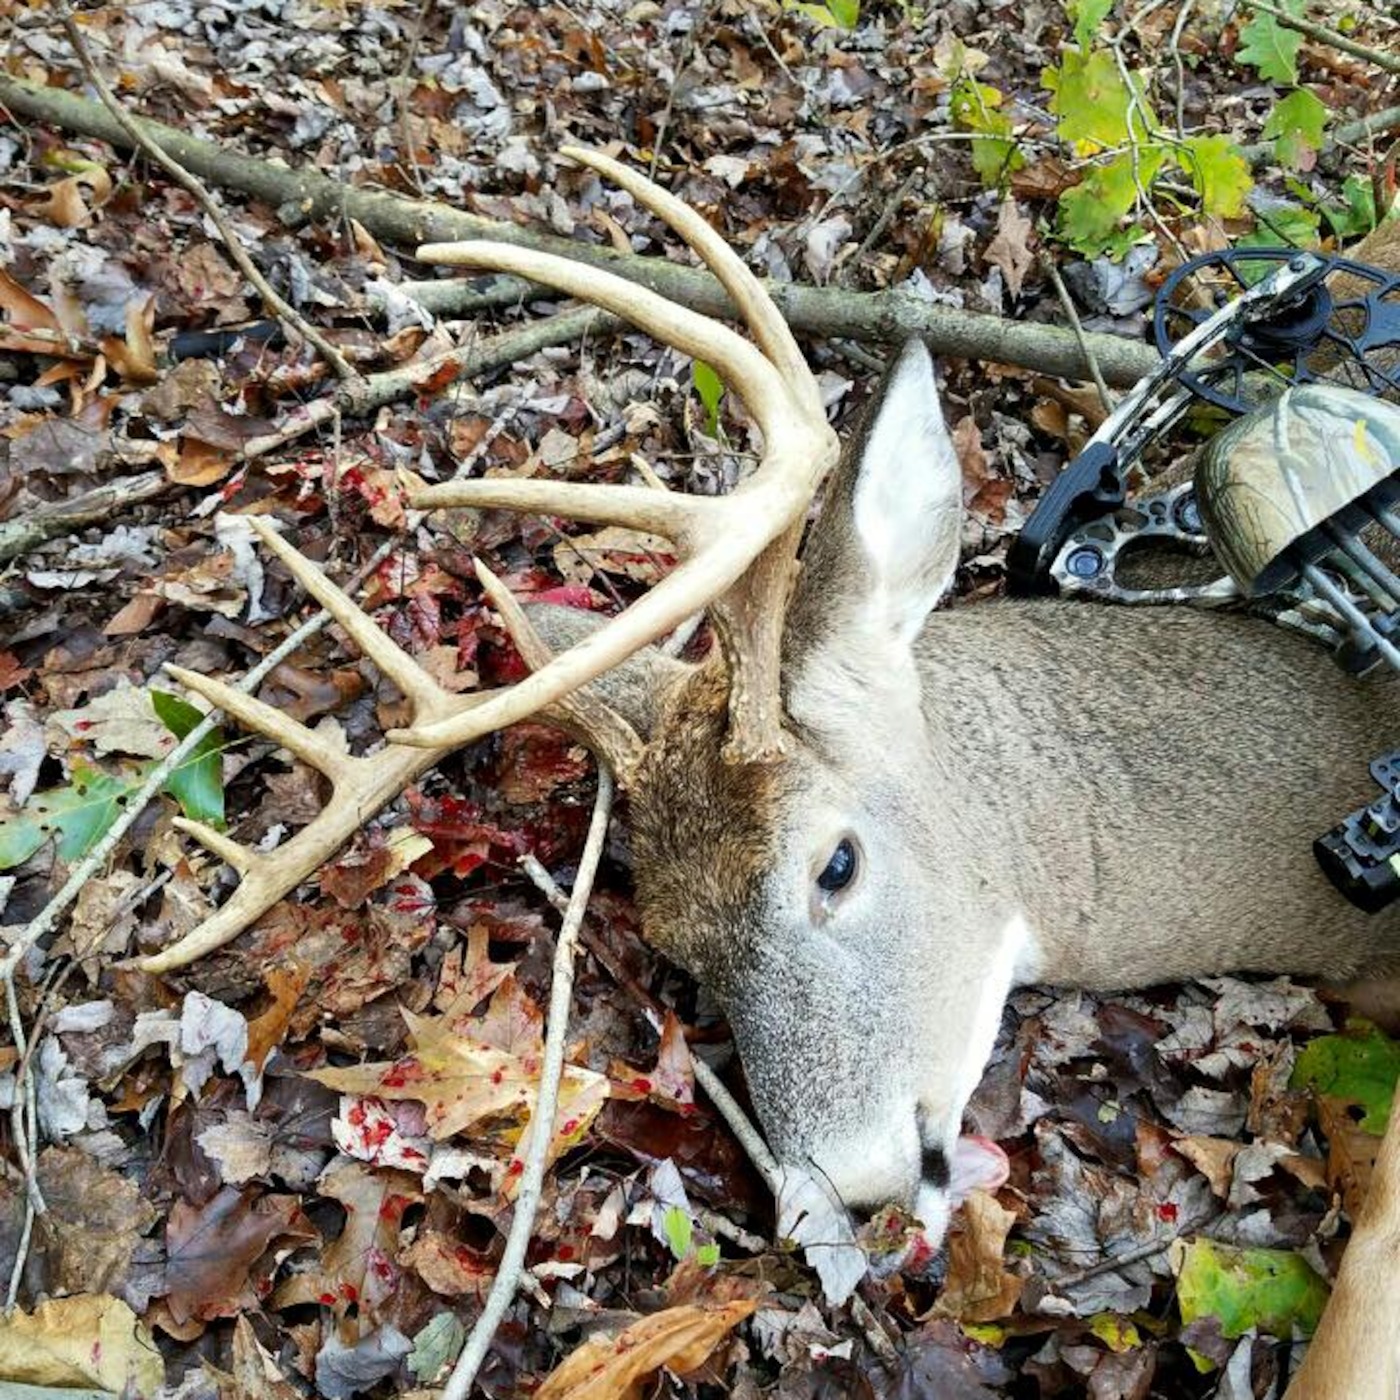 PA Rut Report: Episode 24 - The time of the Rut is upon us!